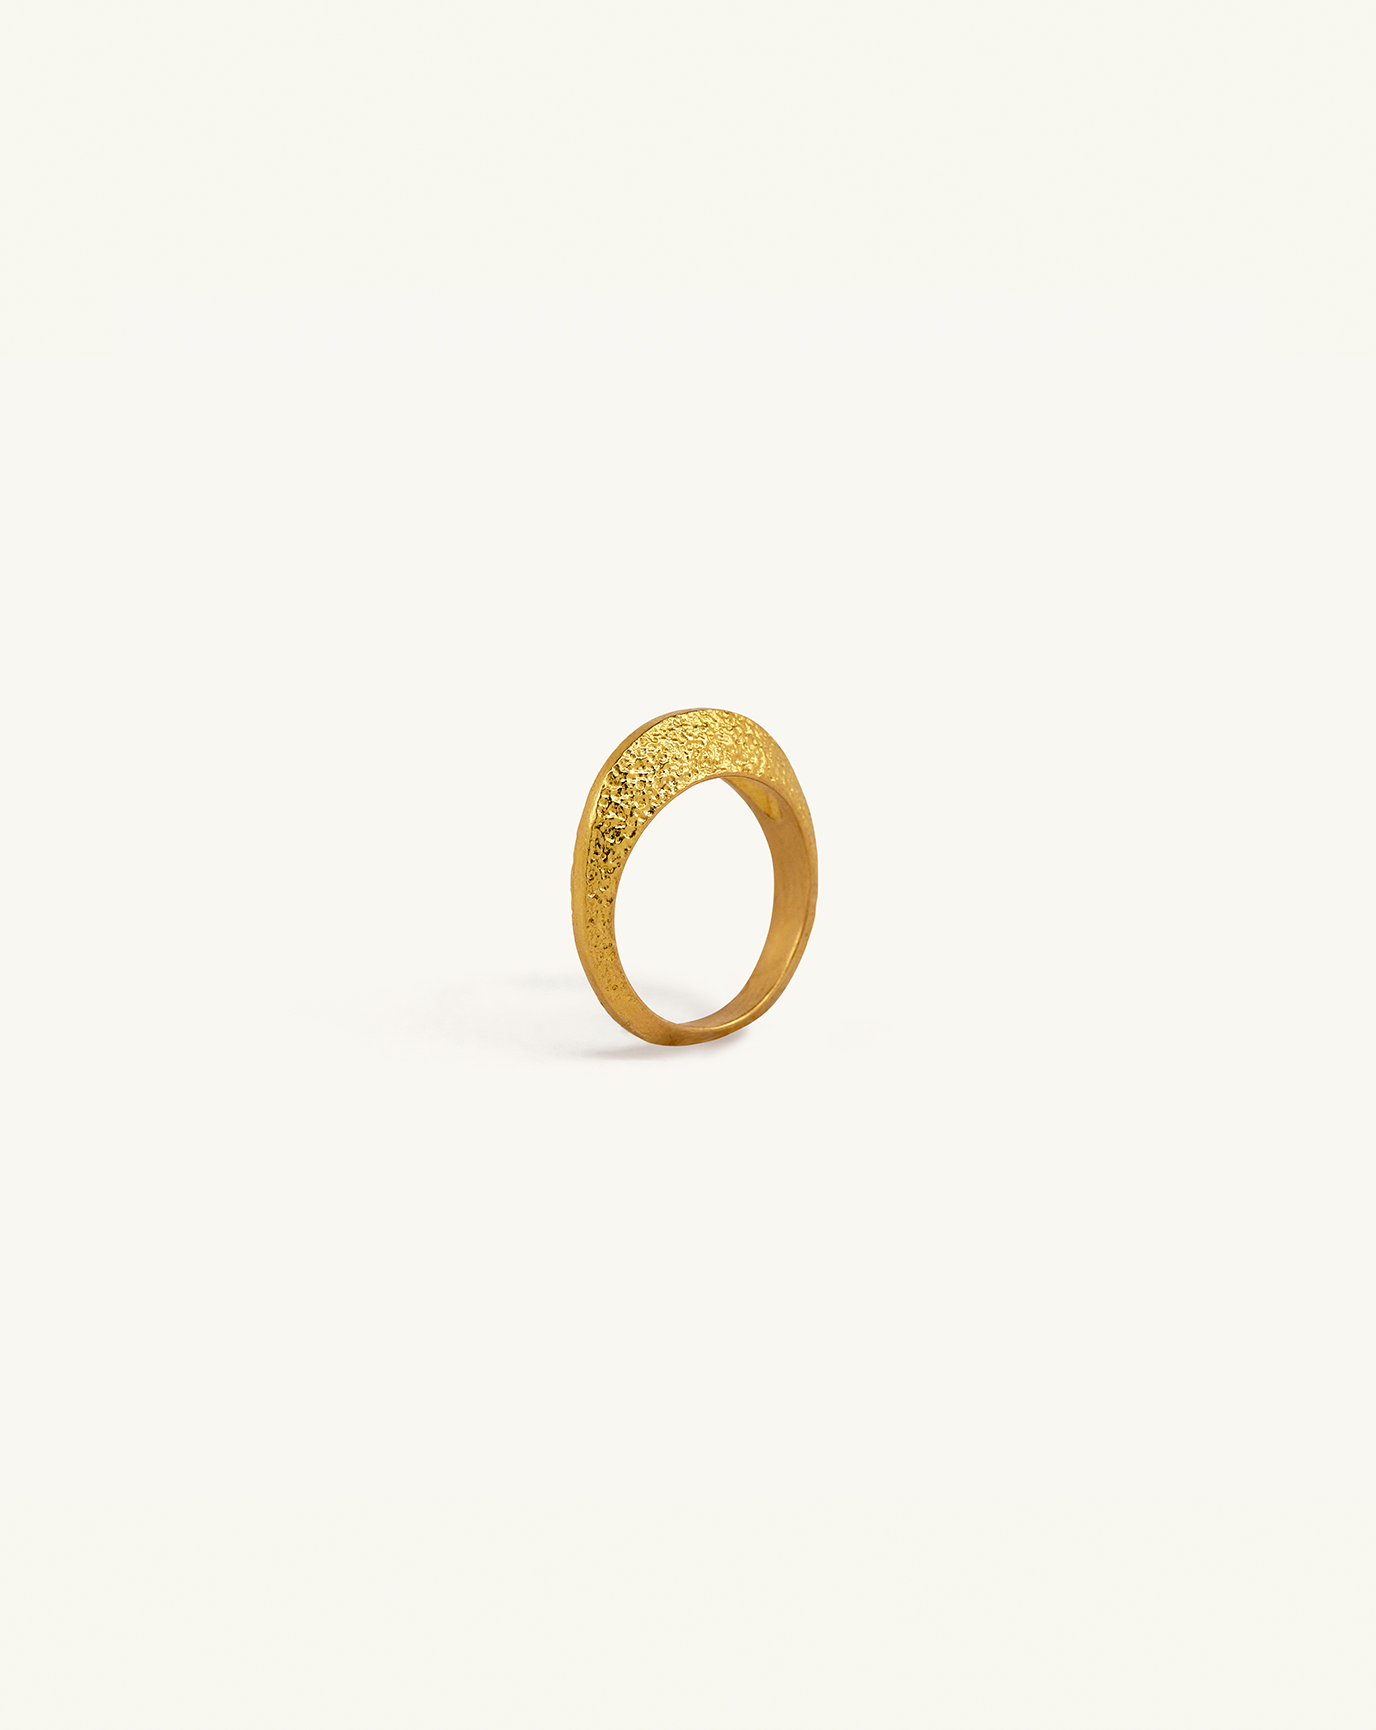 Product image of i seira gold textured sculptural ring